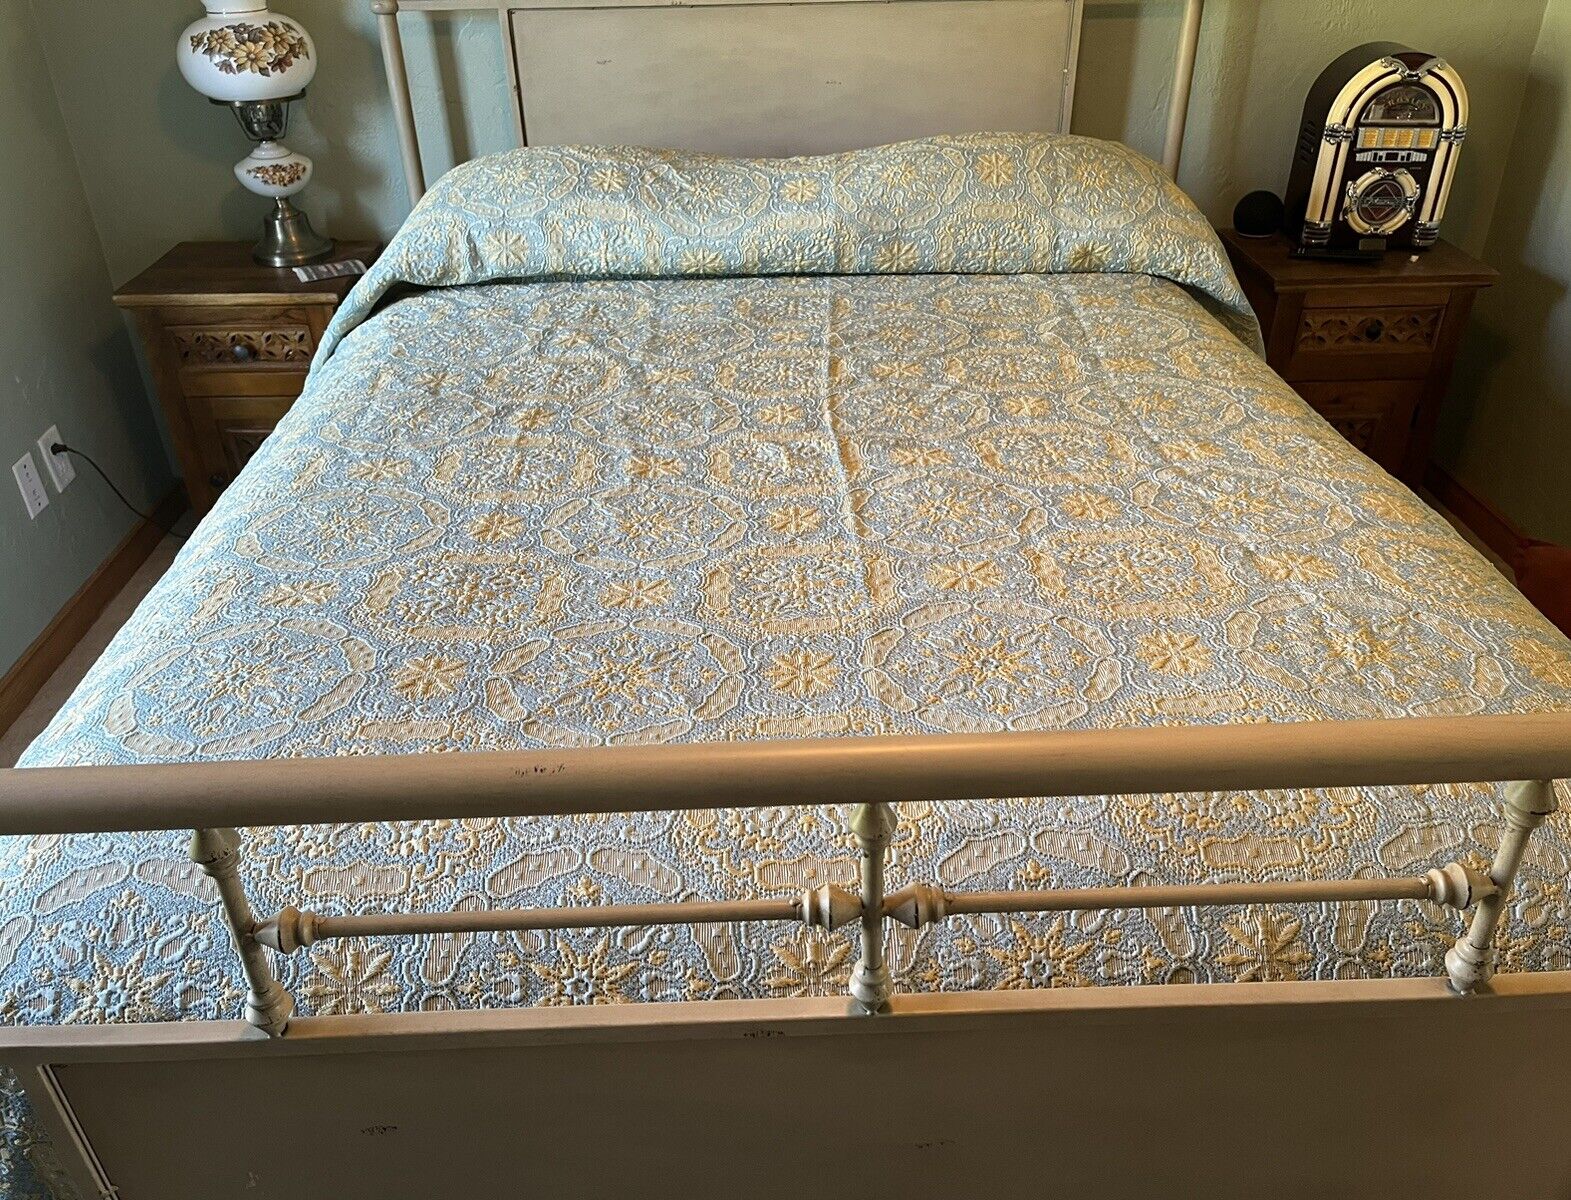 Vintage Sears Bellissimo Collection Heavy Woven Bedspread 80” X 95“ Blue/Yellow